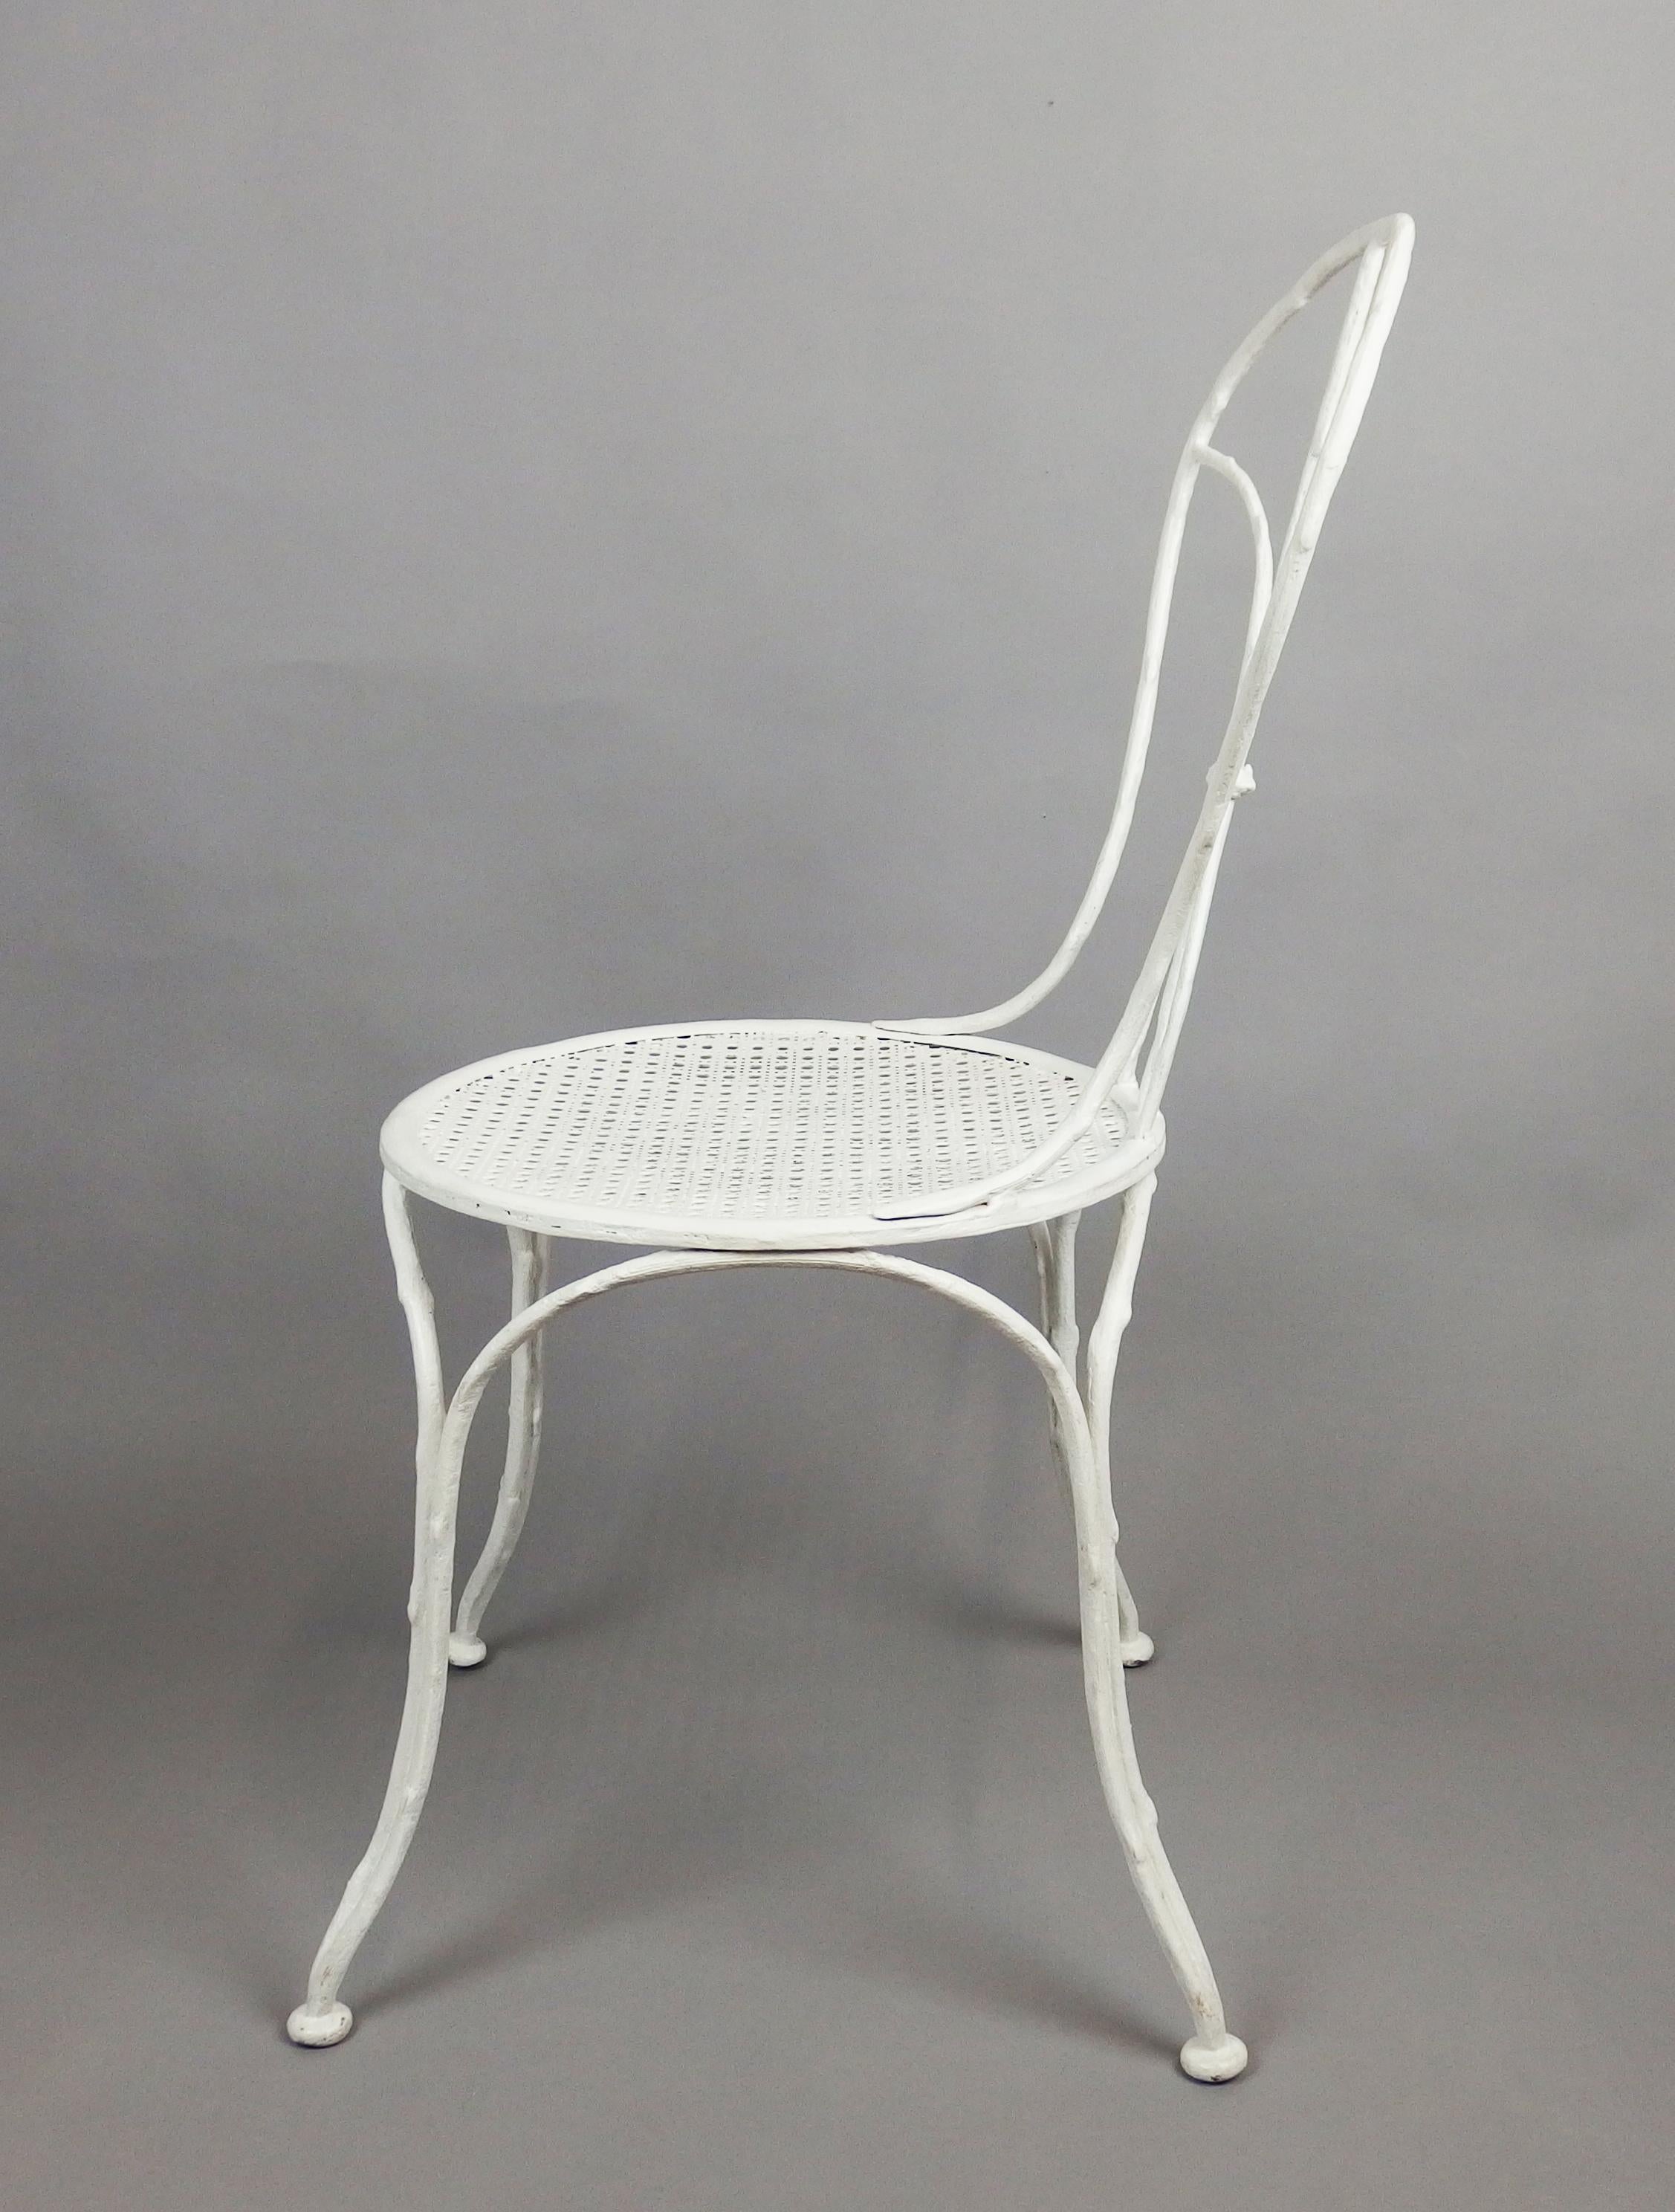 A branches shaped, white enameled cast iron chair, made by 